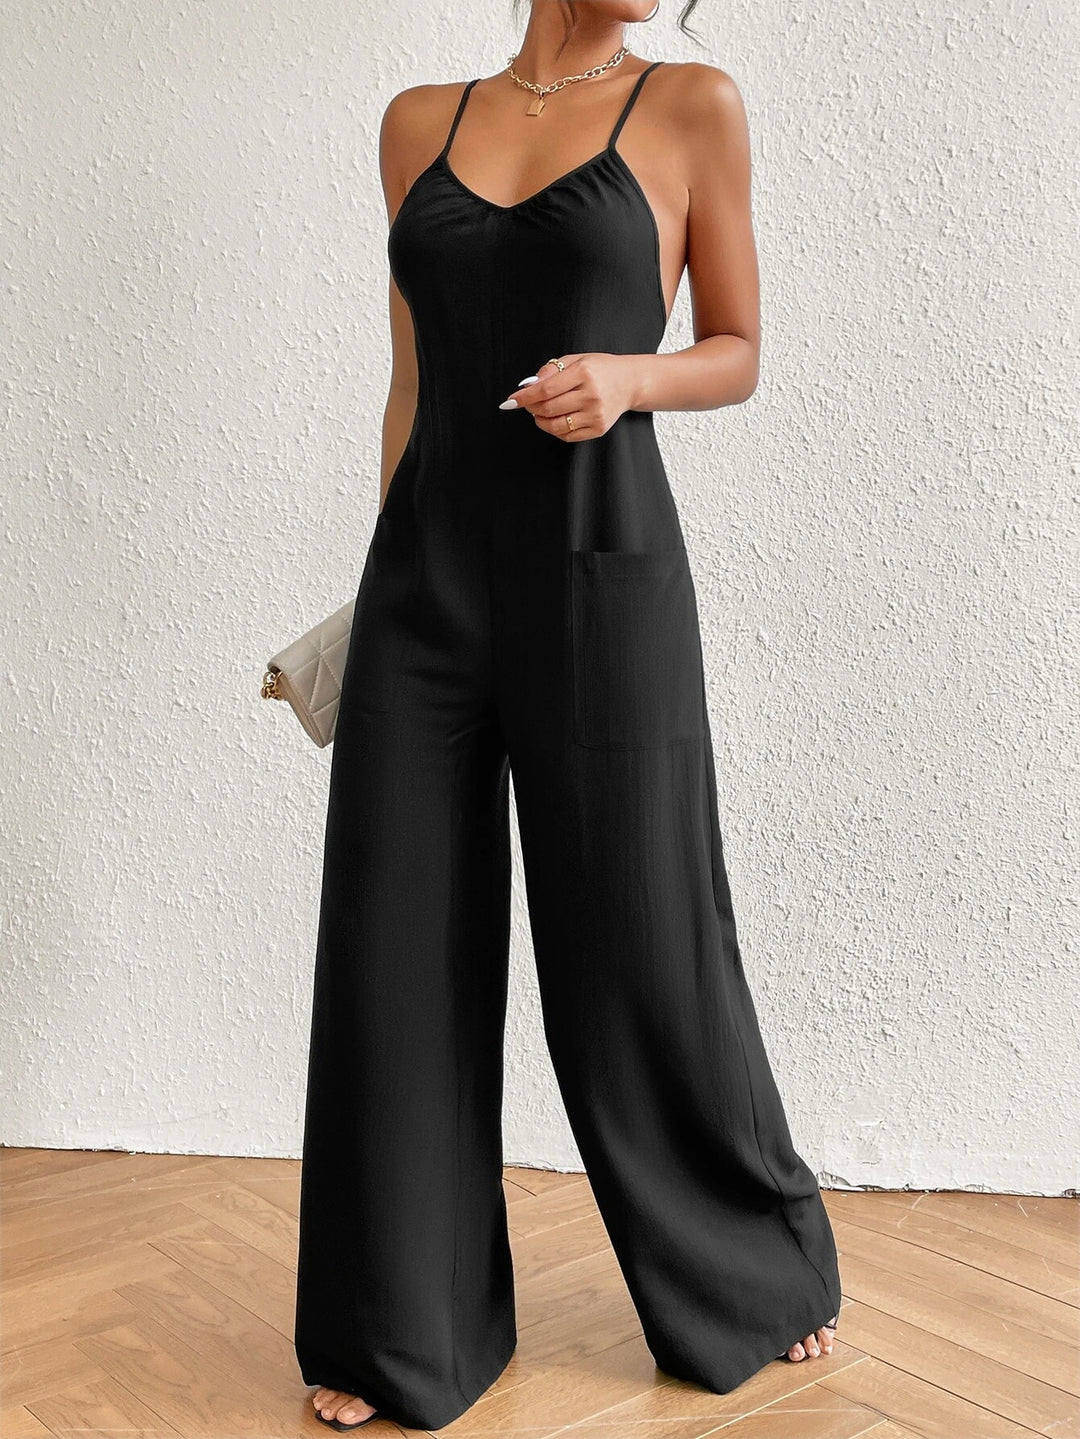 All Products – Page 2 – Comfy Jumpsuits